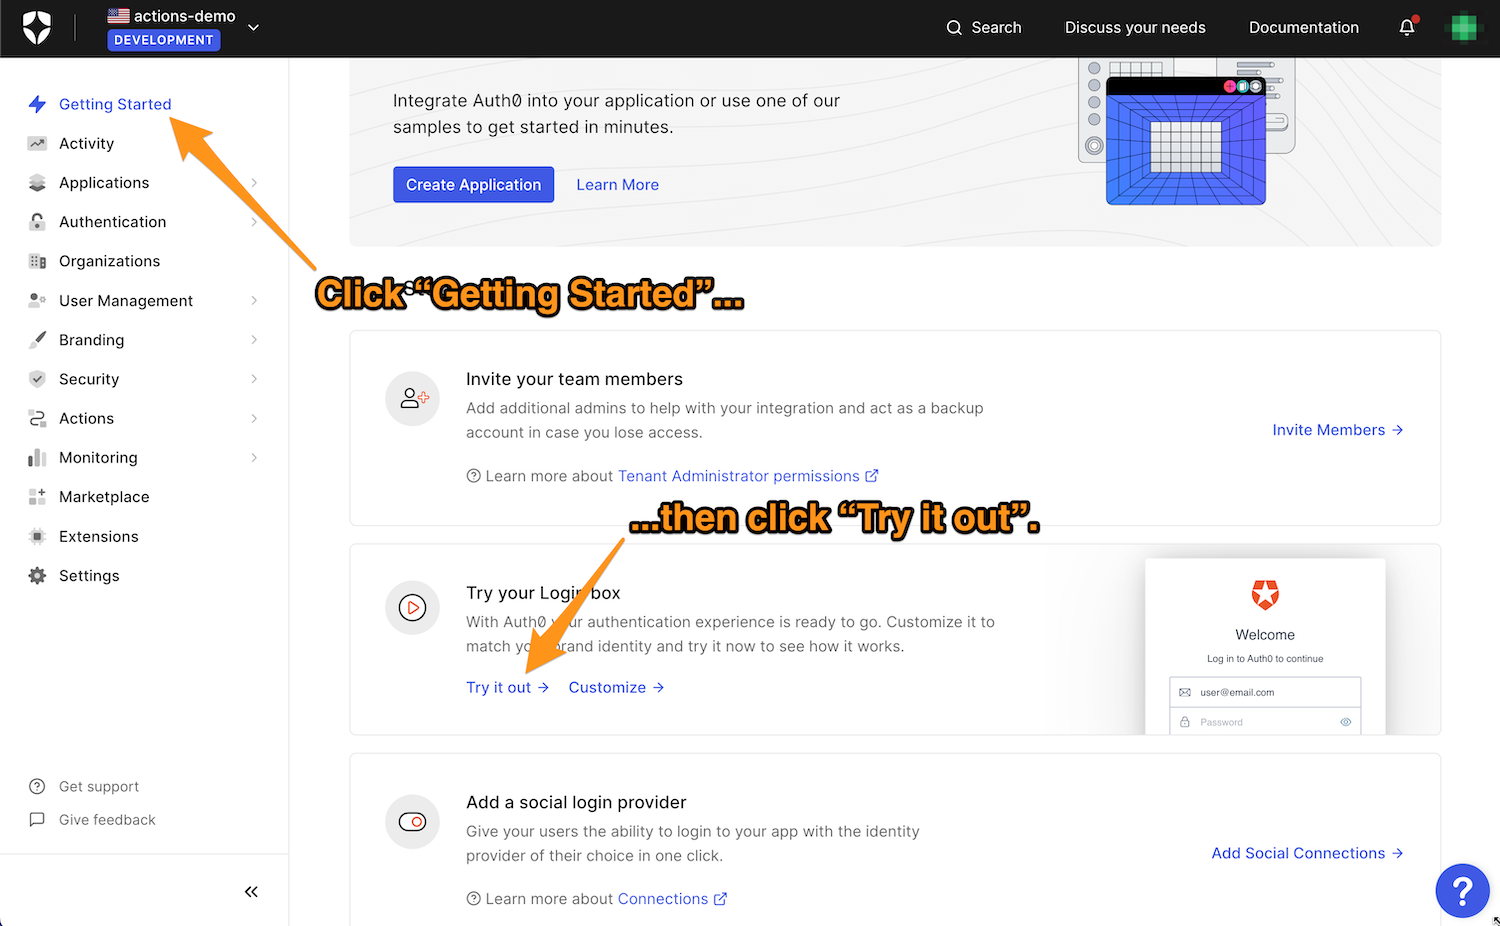 Auth0 Dashboard’s "Getting Started" page, with instructions to click the "Getting Started" link, followed by the "Try it out" link.